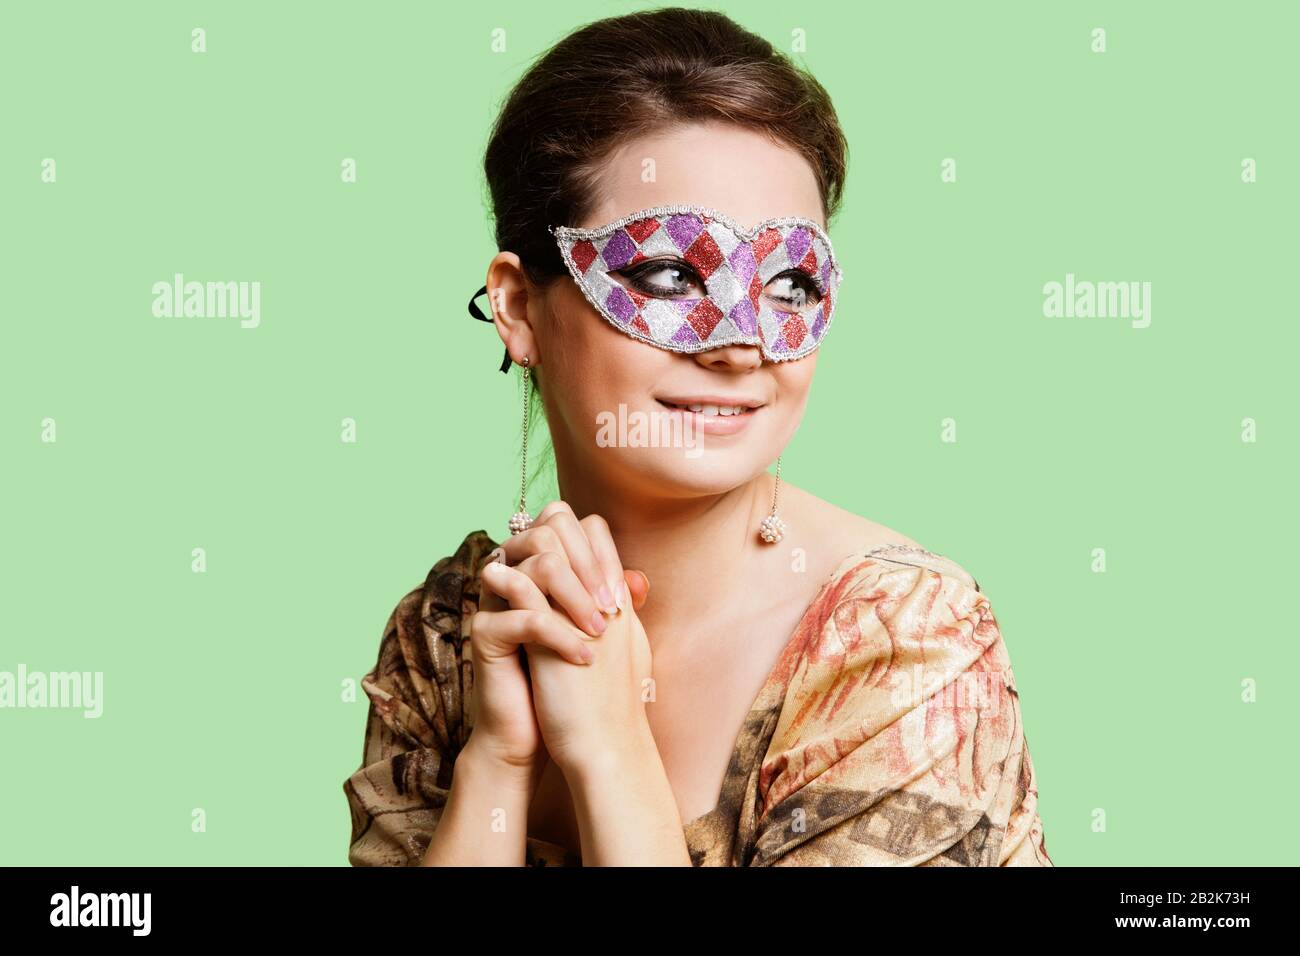 Portrait of beautiful young woman with eye mask day dreaming against green background Stock Photo